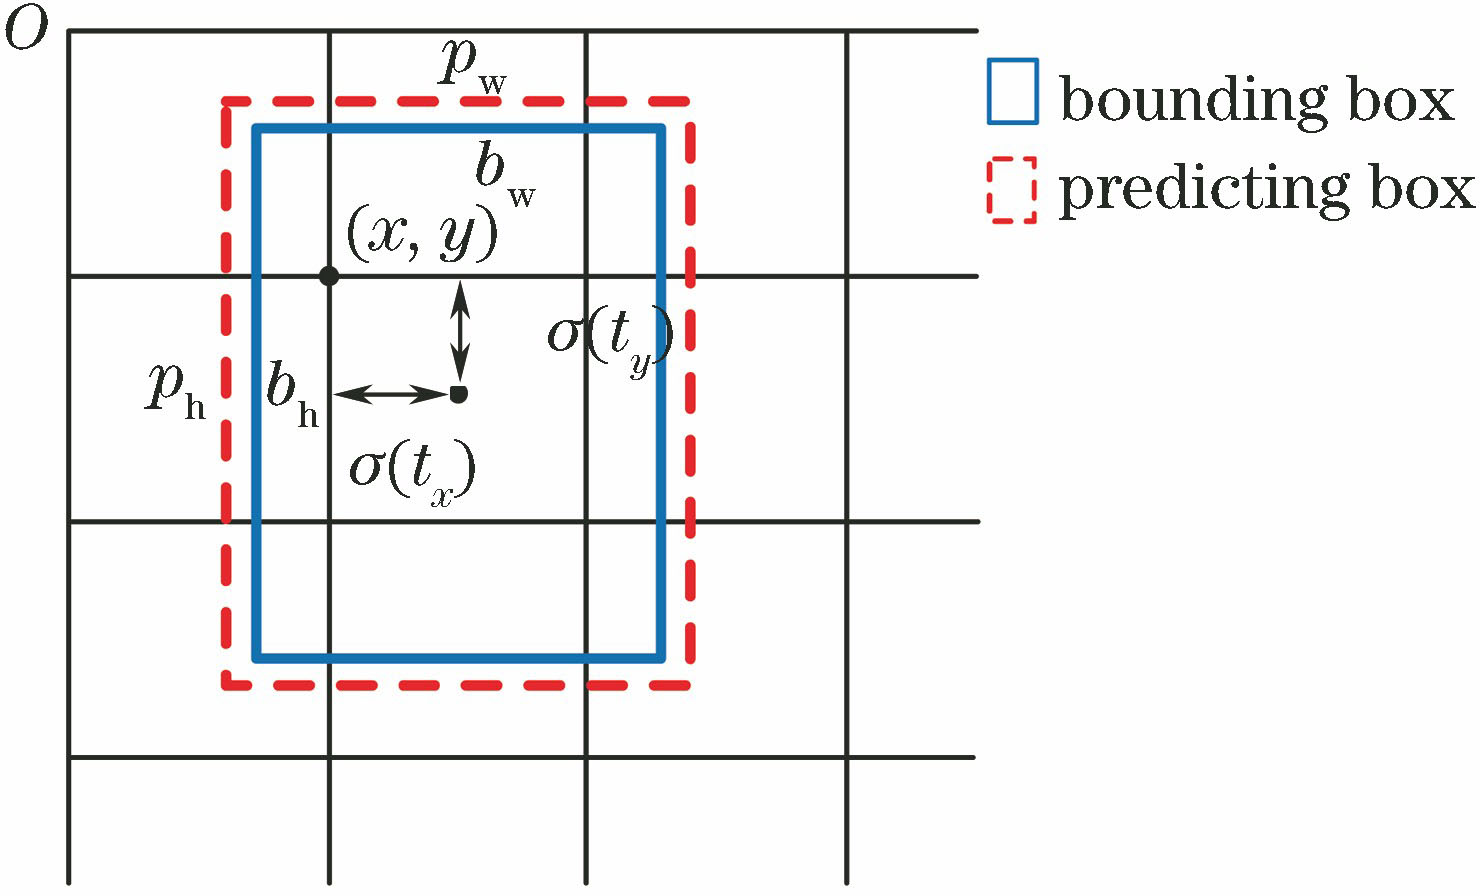 Illustration of positions of predicting and bounding boxes